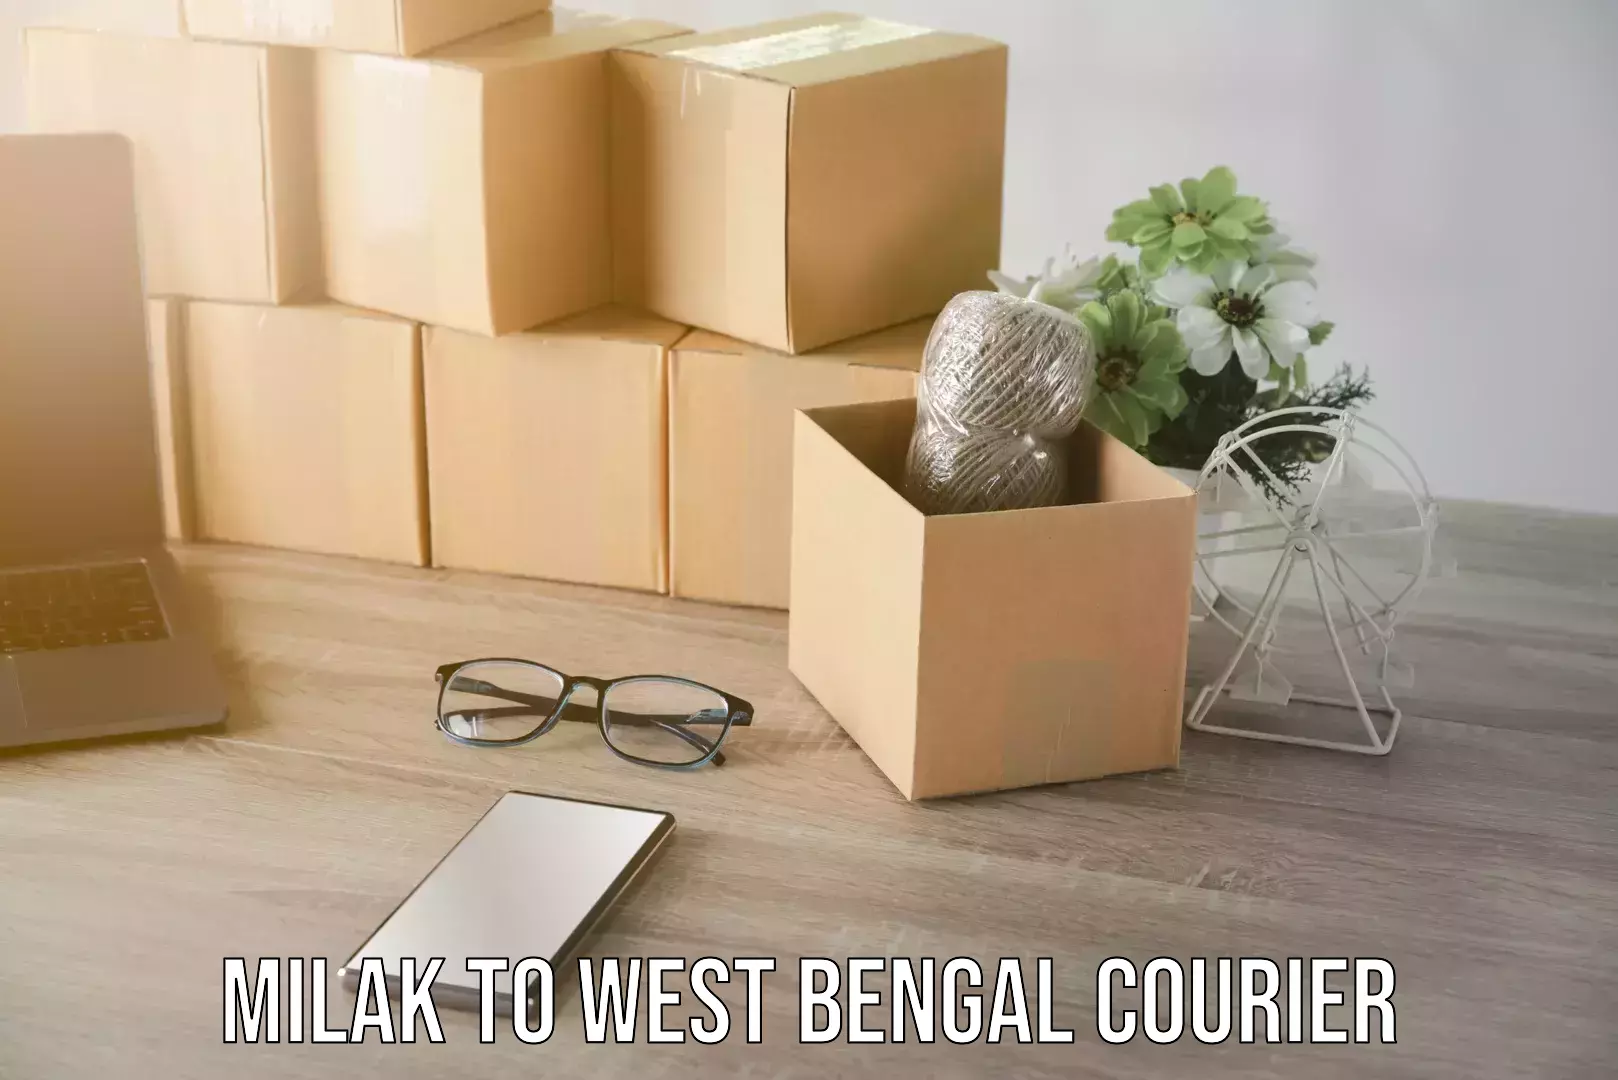 Efficient moving company in Milak to West Bengal